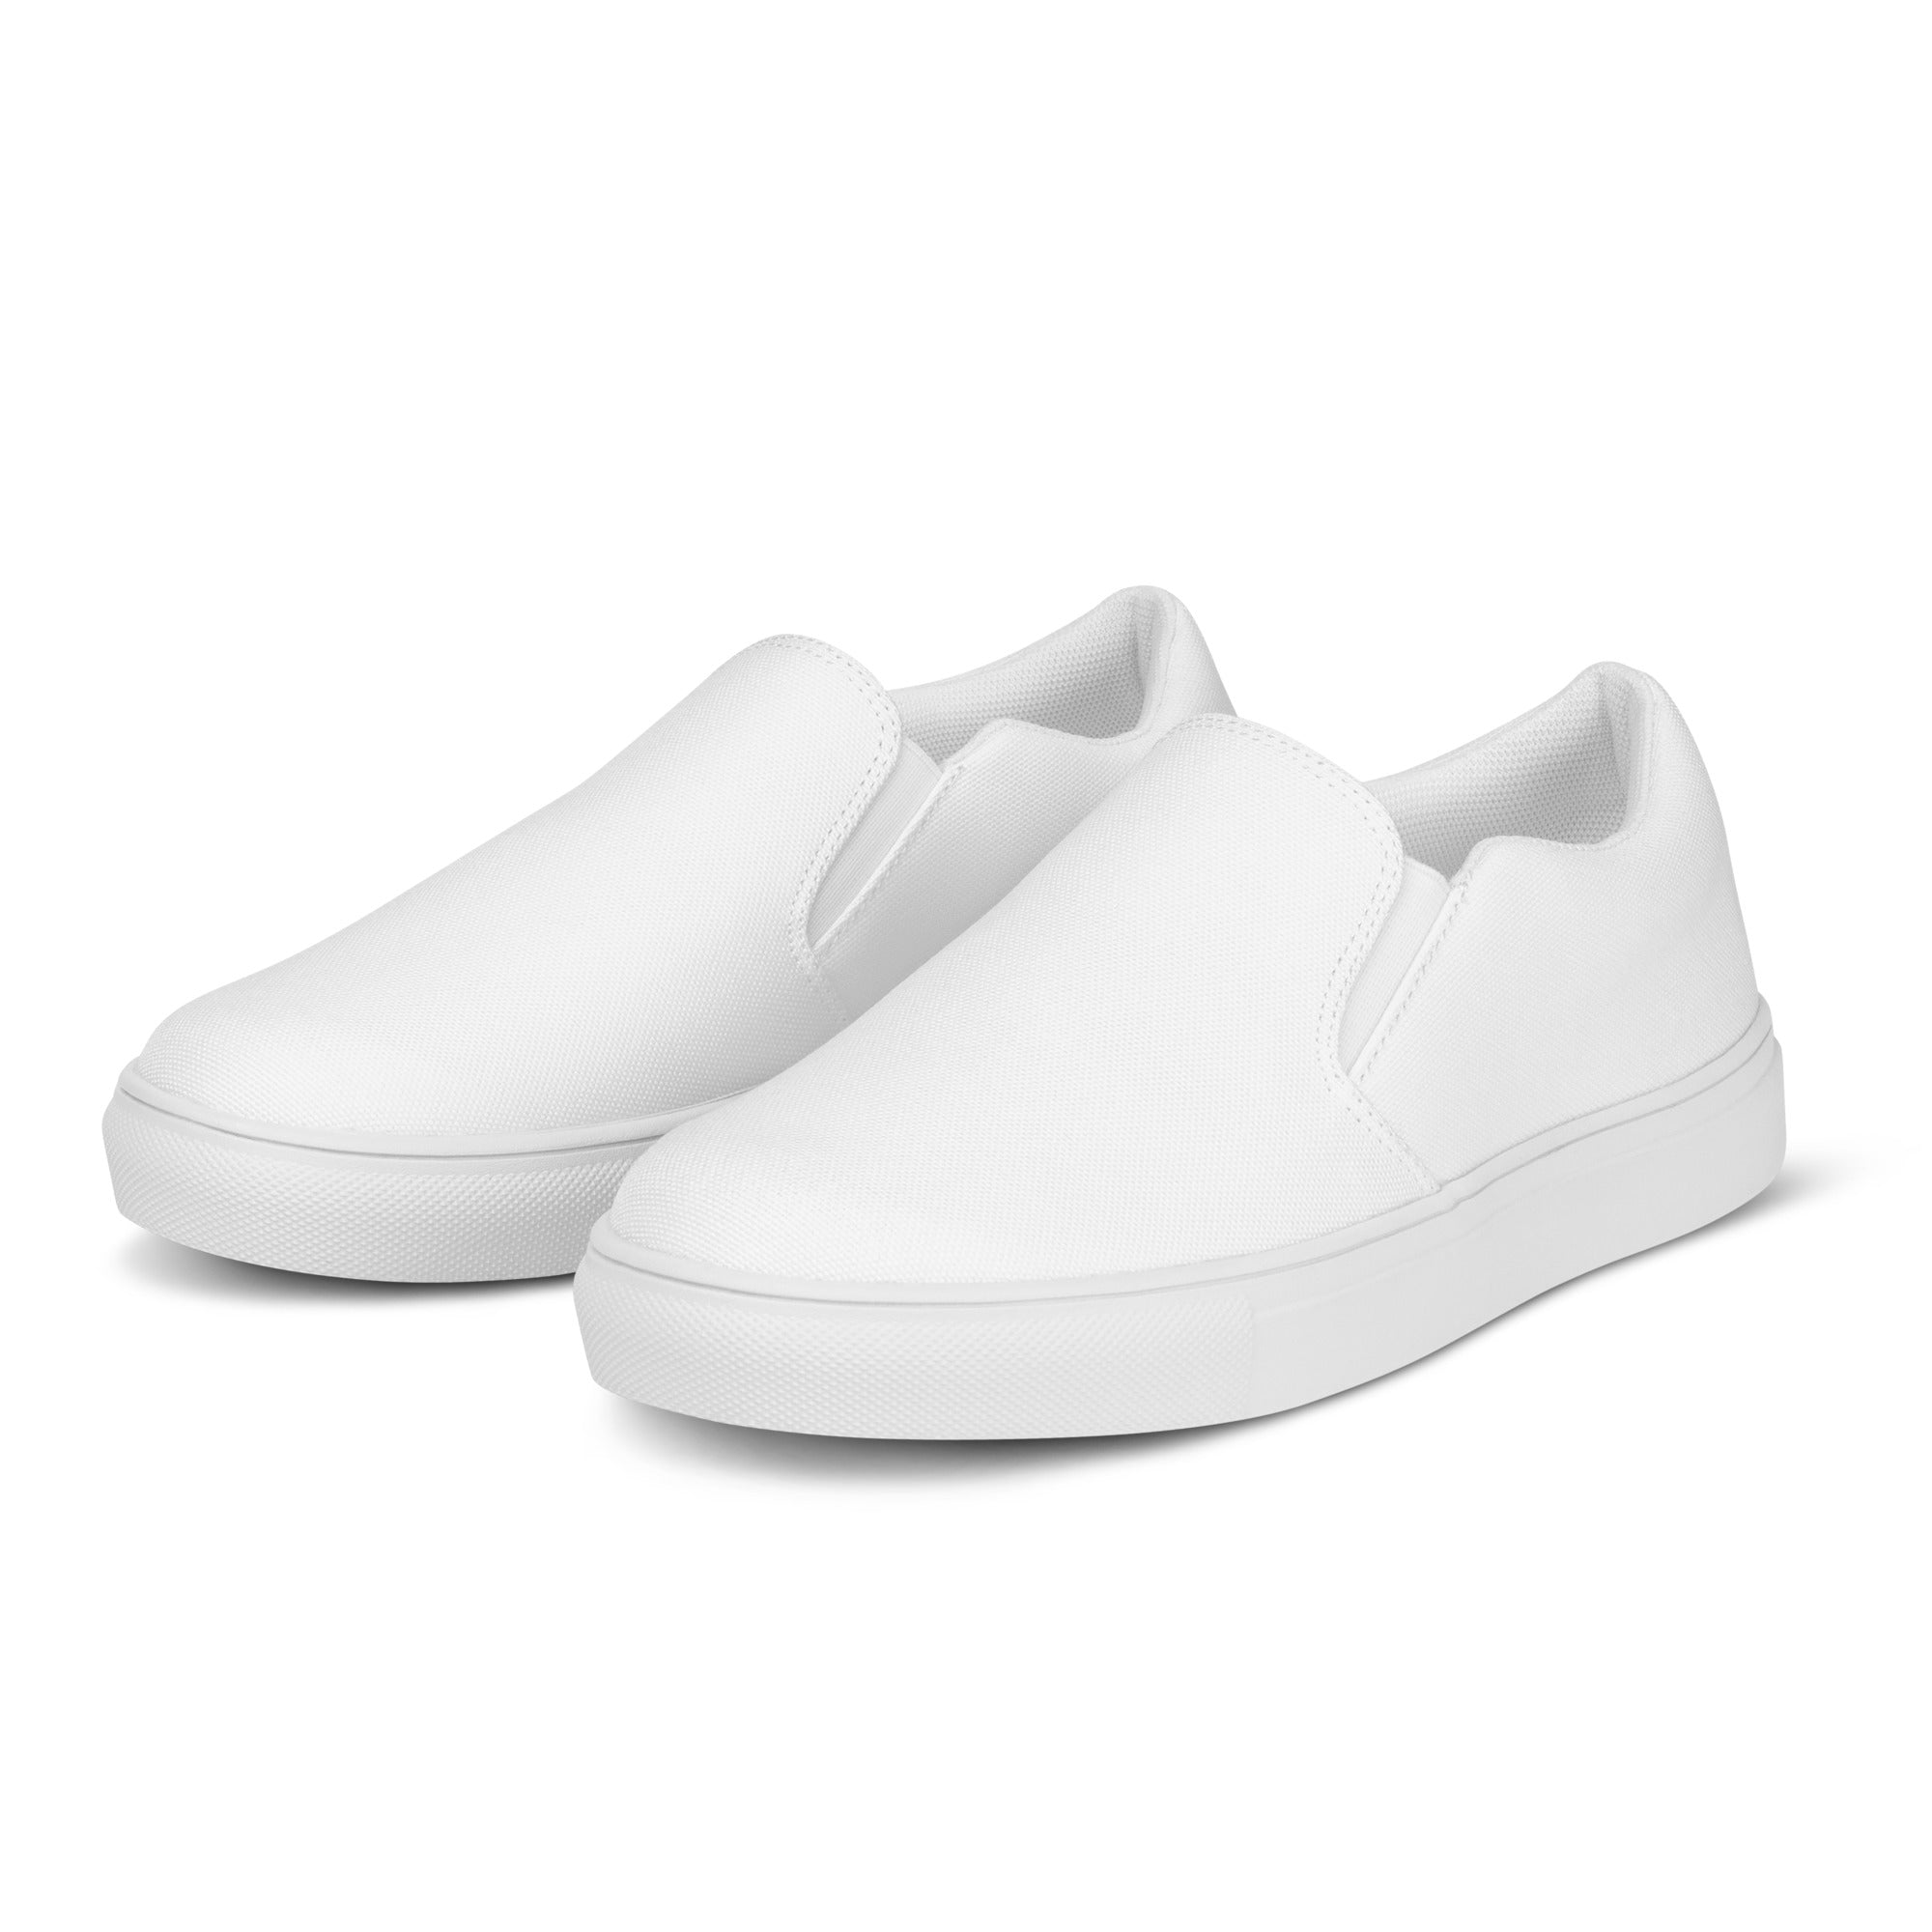 White with Onyx Swirl Island-Women’s slip-on canvas shoes